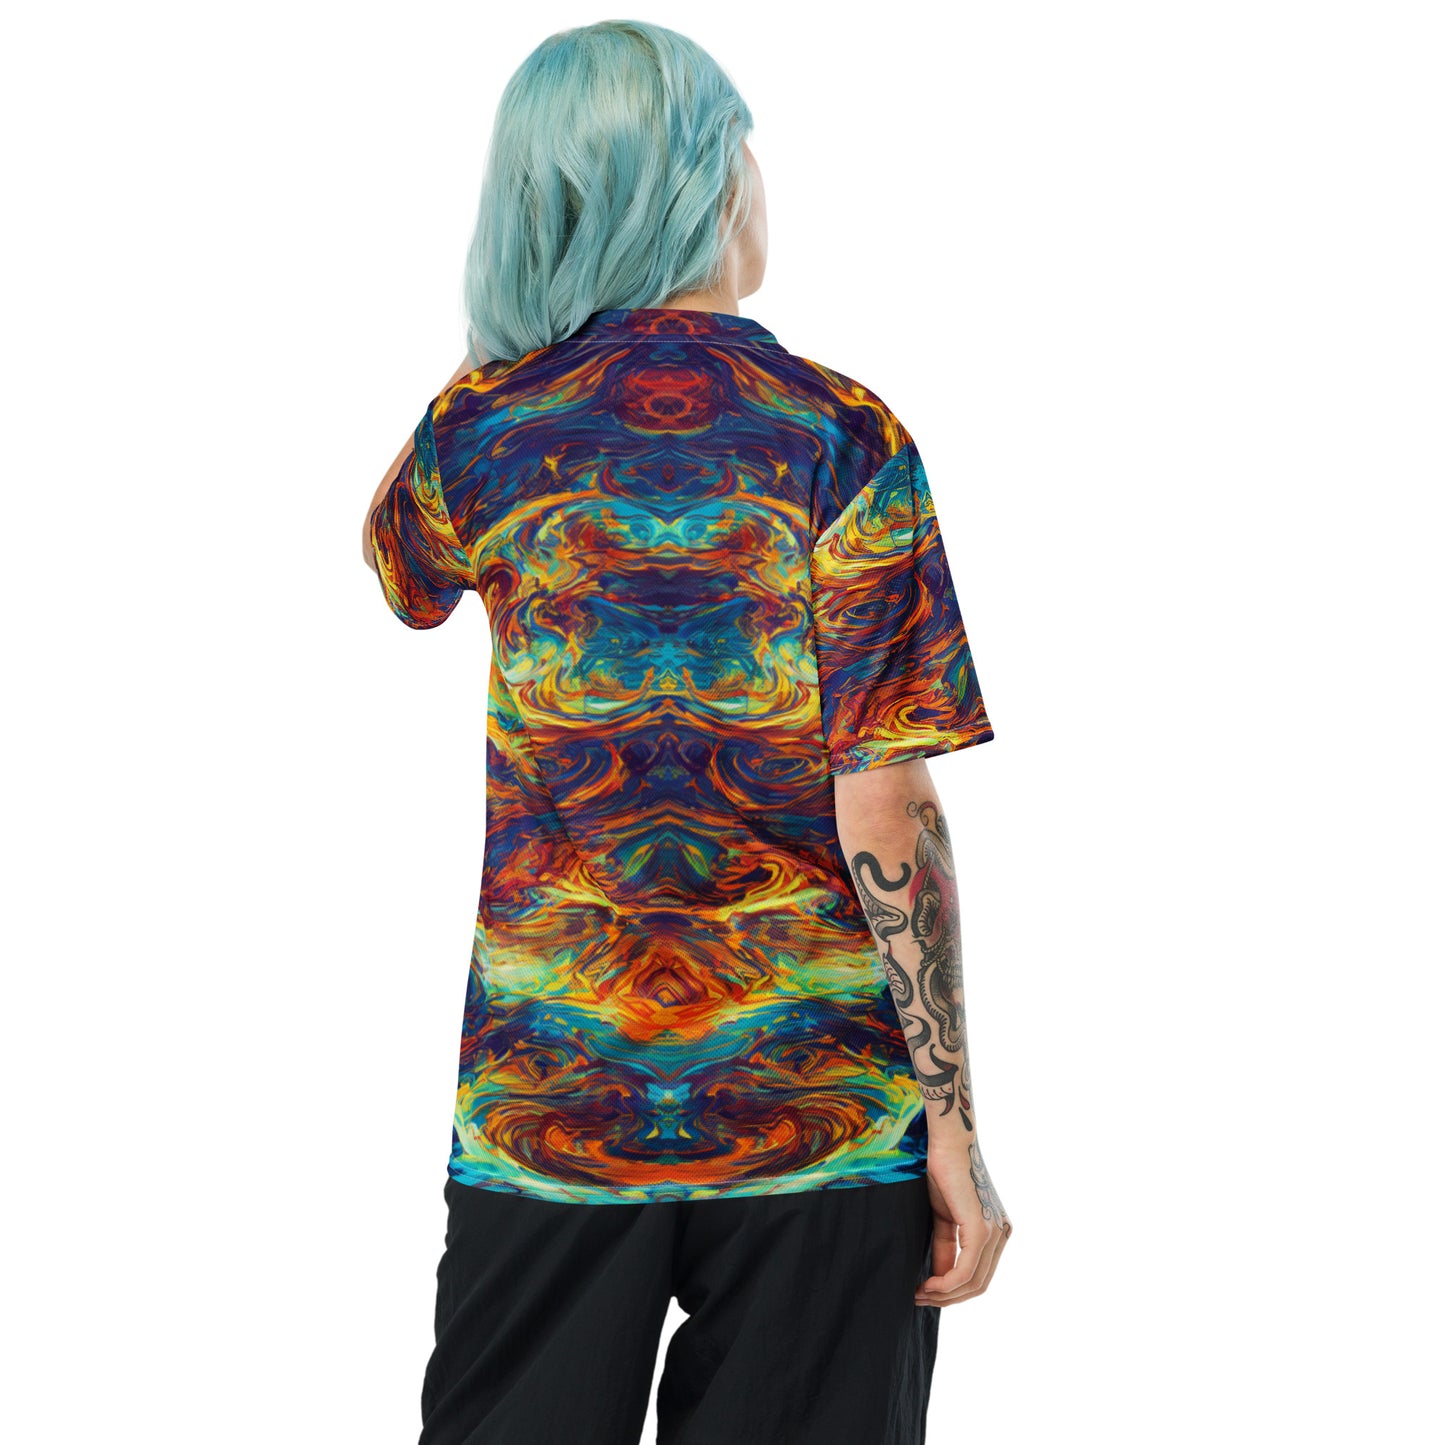 Flaming Confusion : Recycled unisex sports jersey